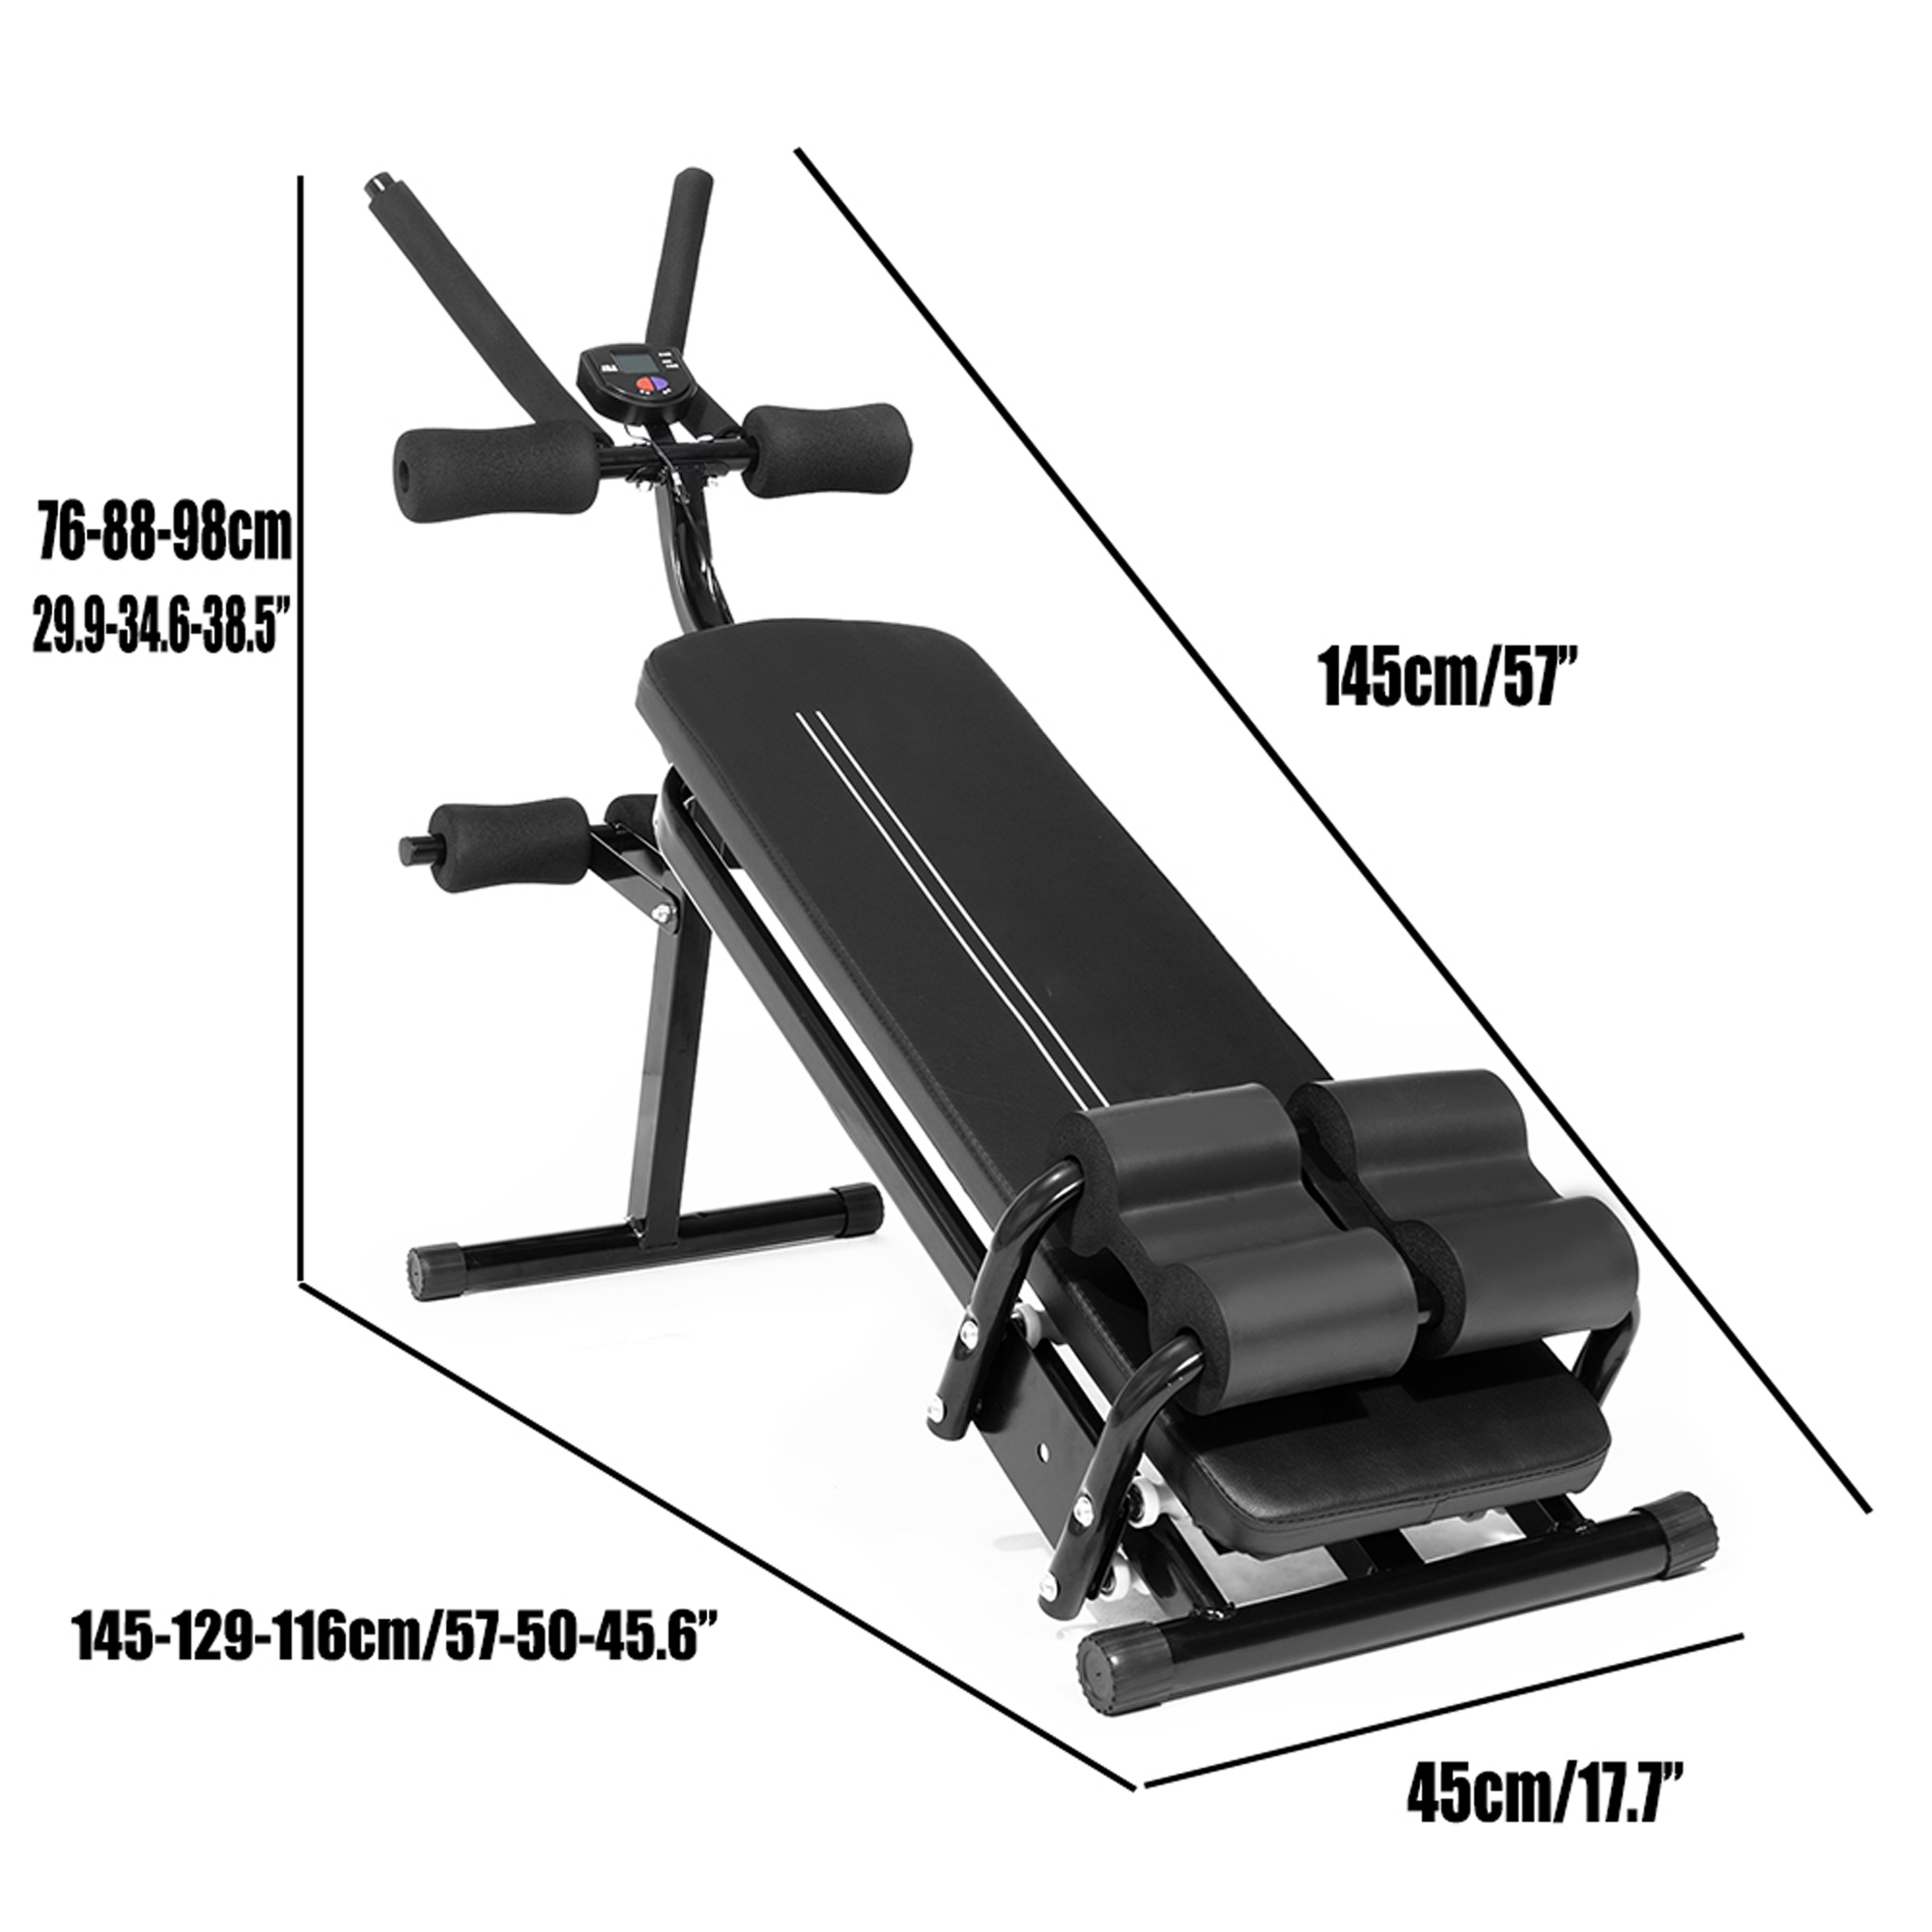 SAYFUT Roller Coaster Abdominal Machine Waist Fitness Equipment Abdomen Exercise Machine with LCD Display, for Home Gym Muscle Build Fitness Workout - image 3 of 7